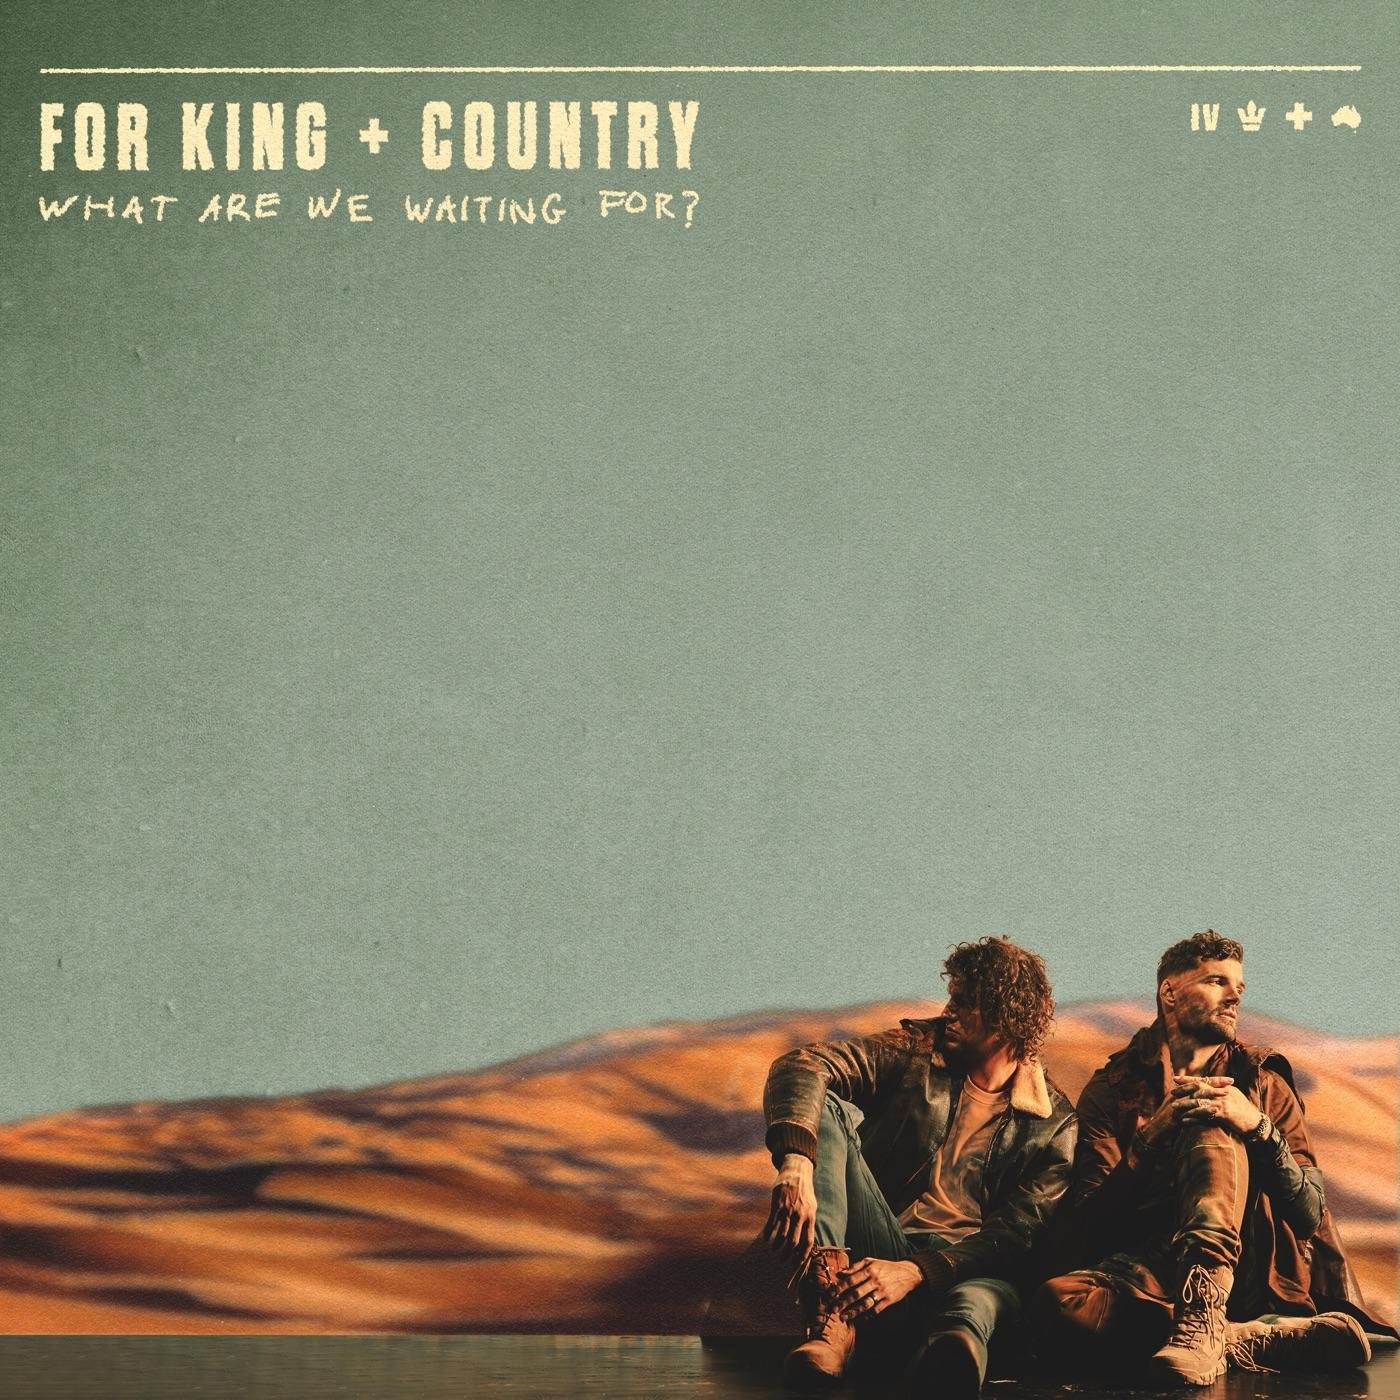 for KING & COUNTRY.jpg